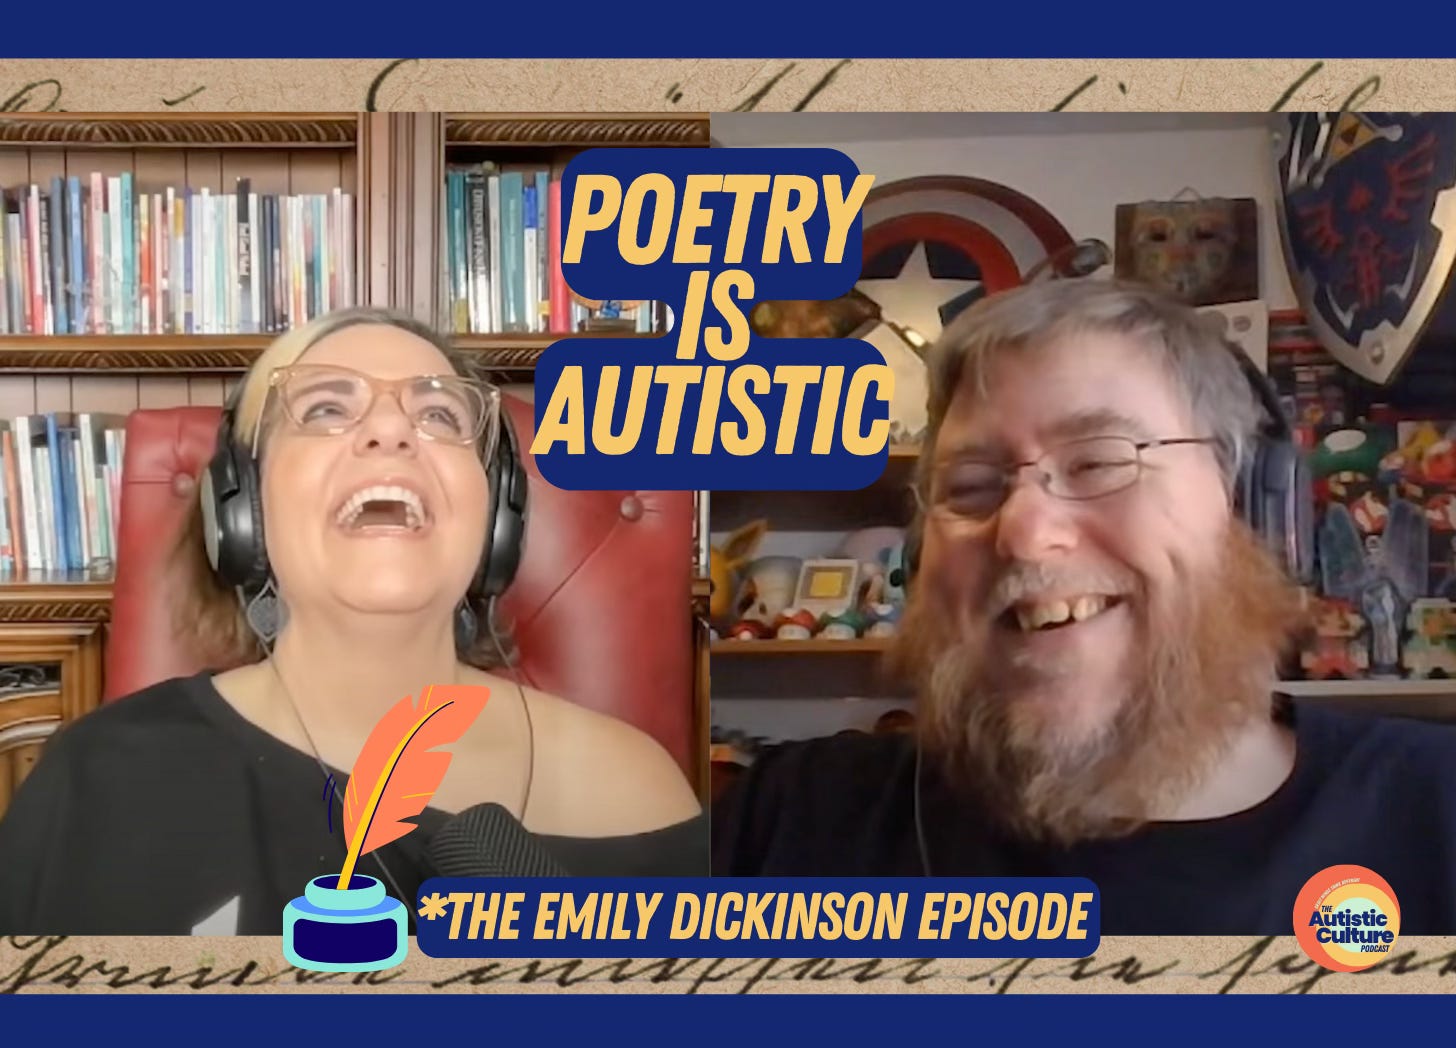 Listen to Autistic podcast hosts discuss: Poetry is Autistic